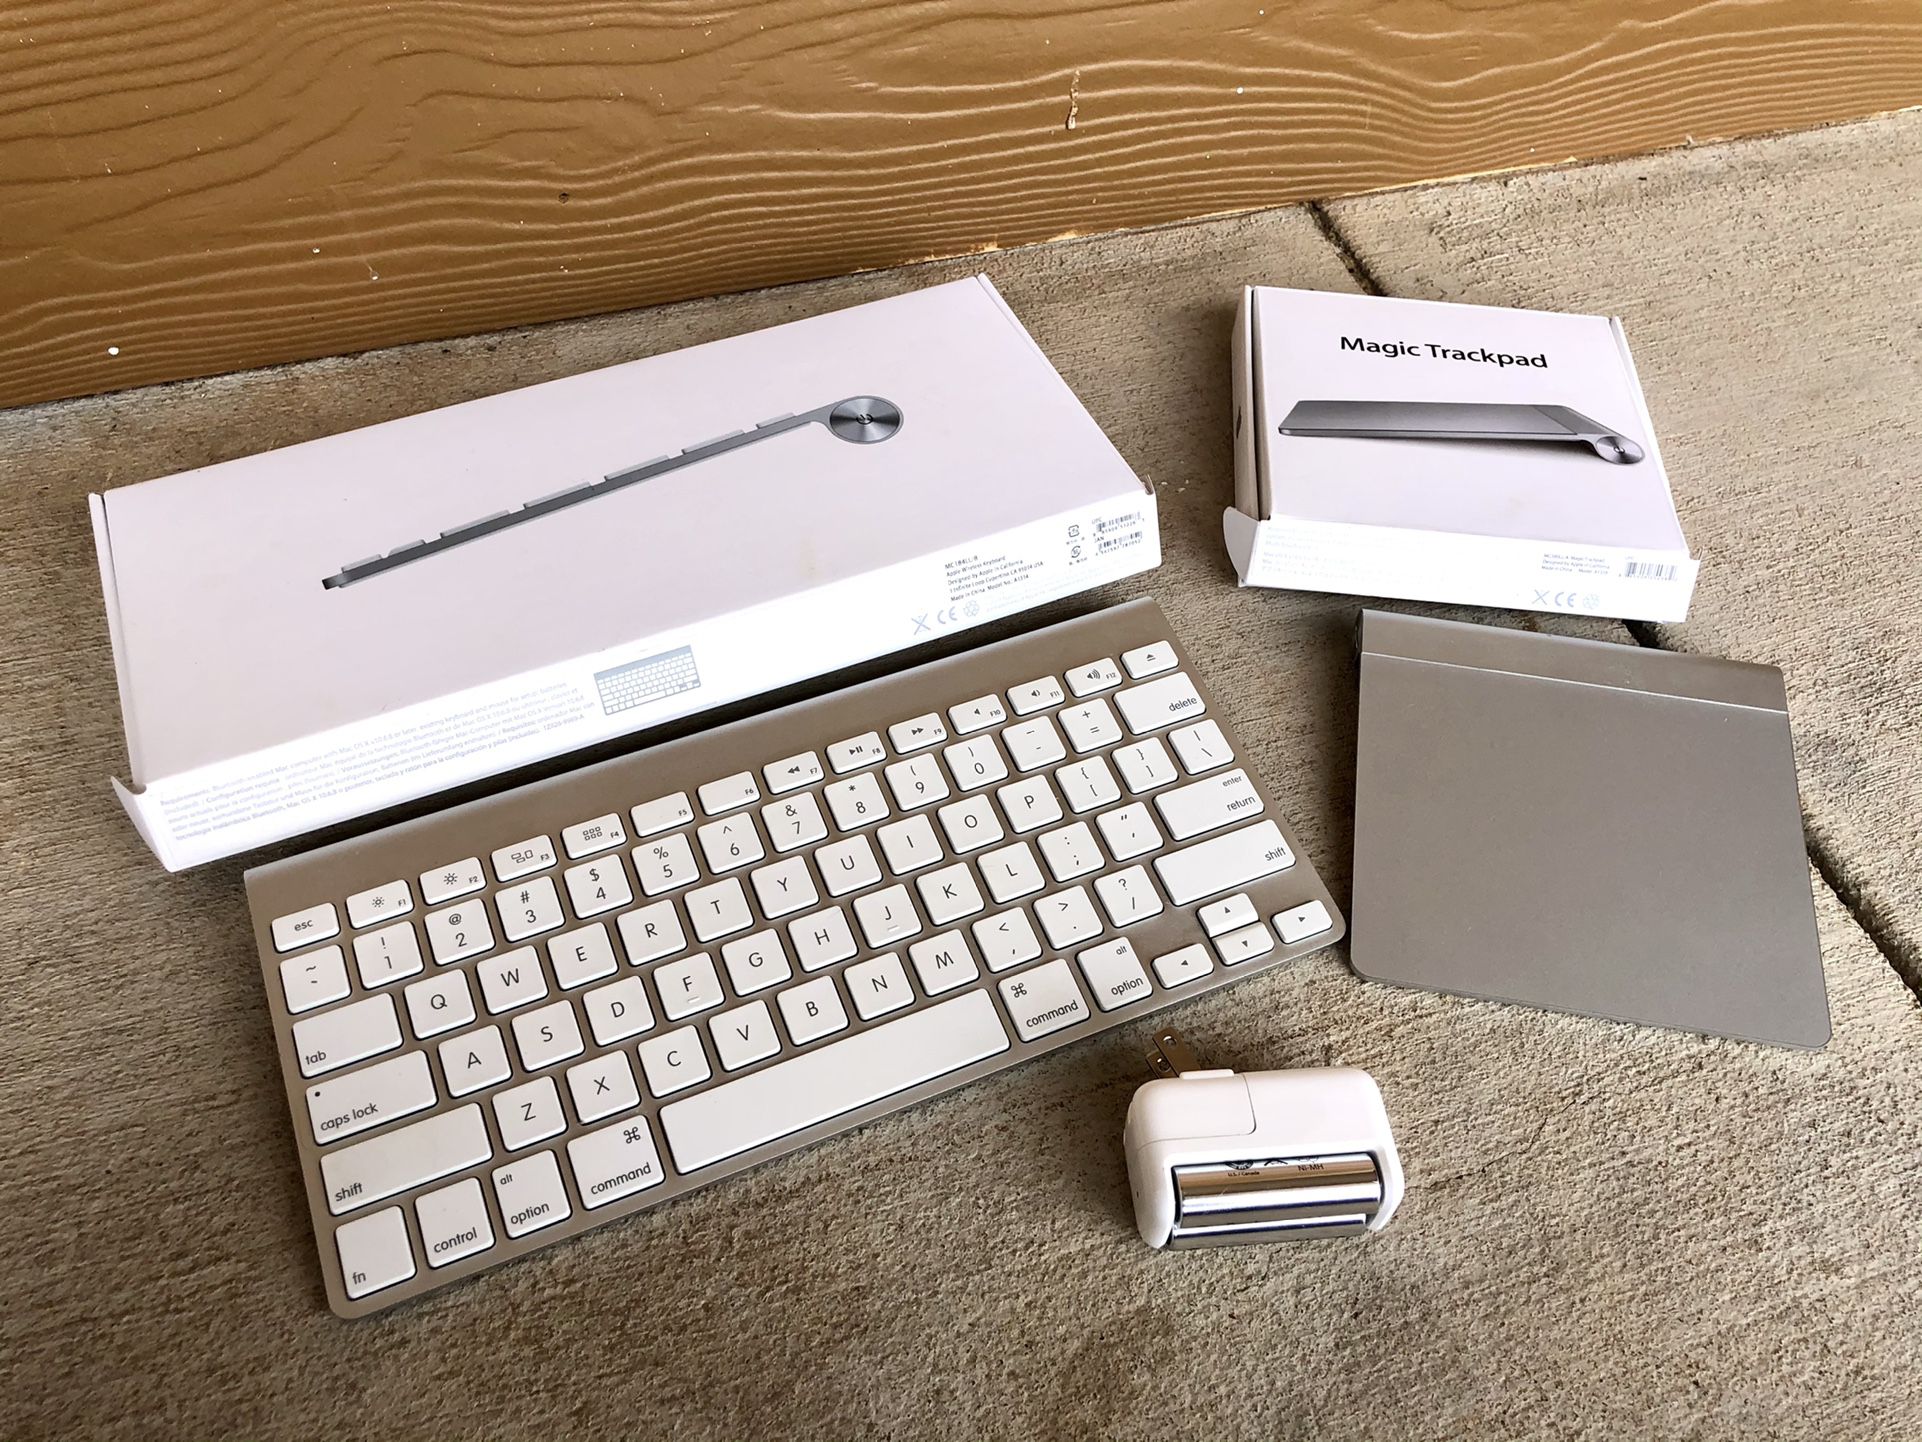 Apple Wireless Keyboard, Trackpad, and 2 Batteries with Charger